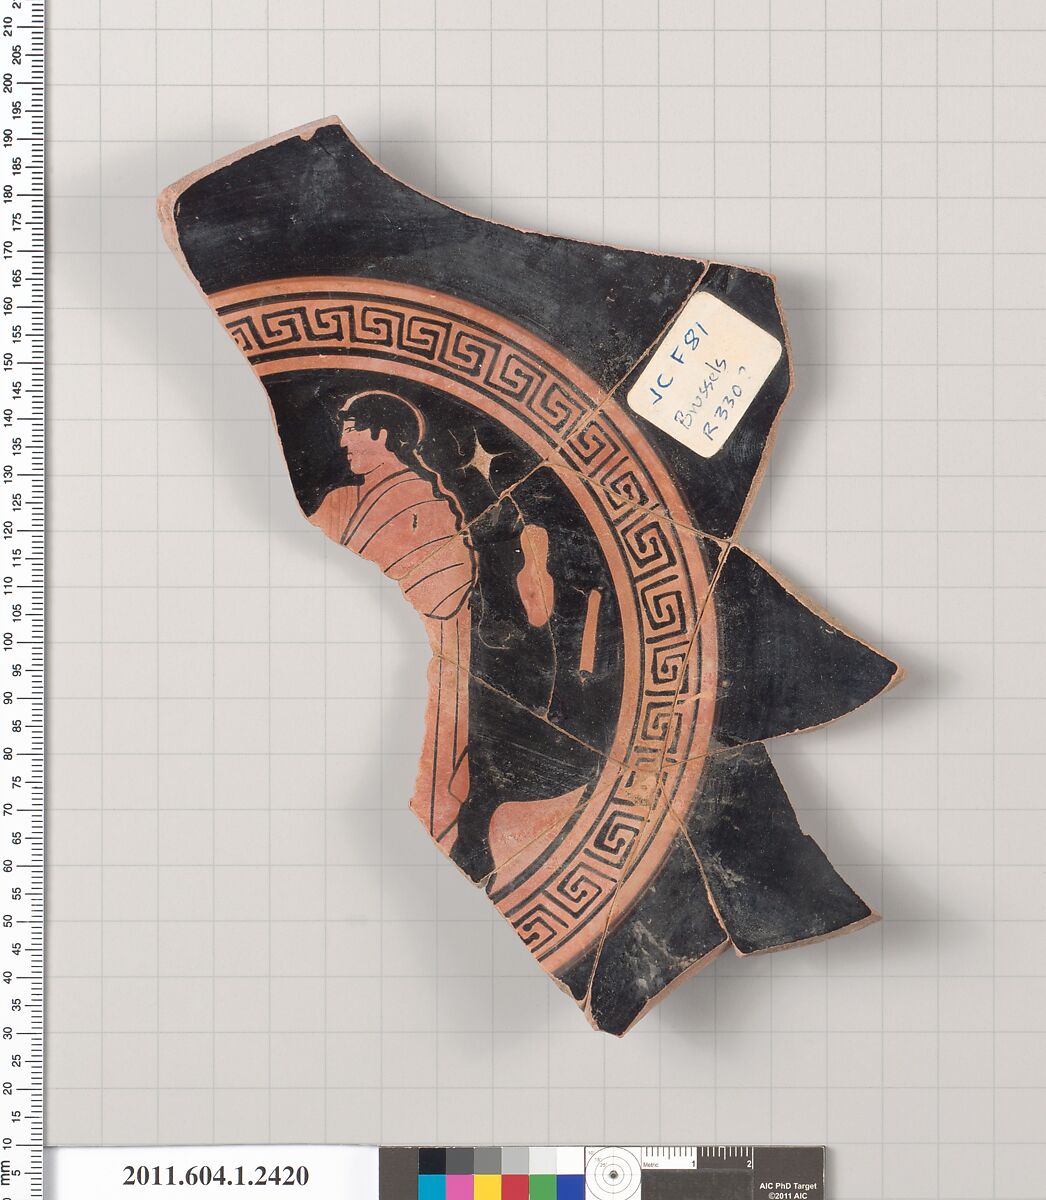 Terracotta fragment of a kylix (drinking cup), Attributed to the Painter of Brussels R 330 [DvB], Terracotta, Greek, Attic 